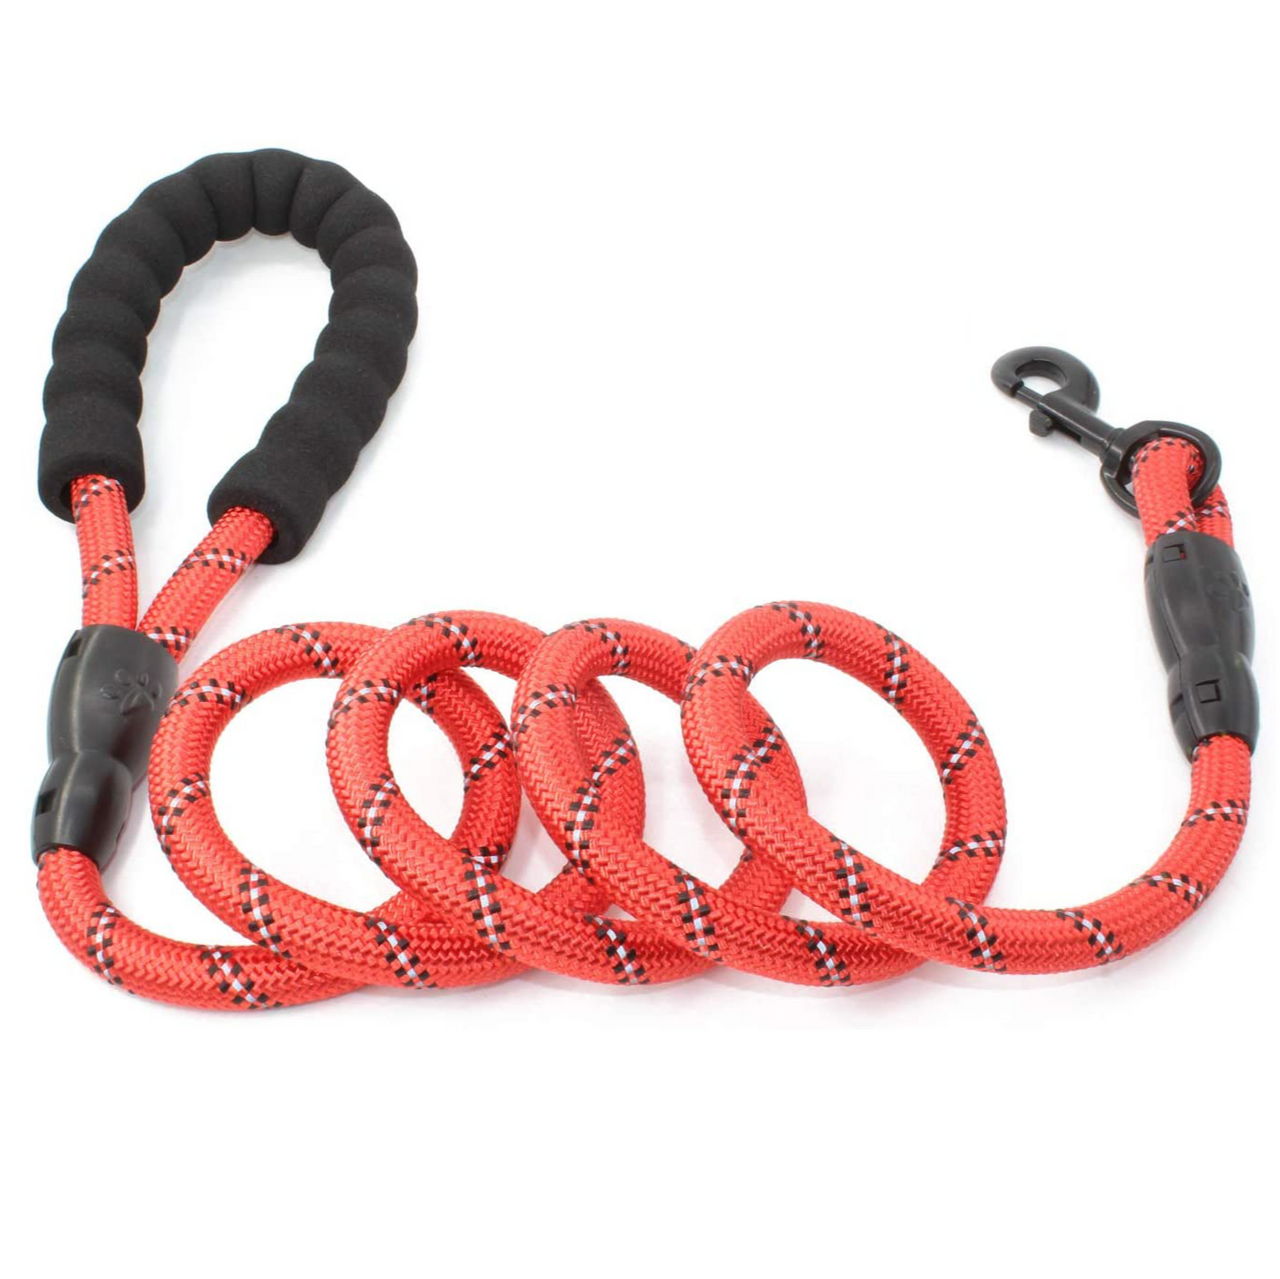 5-Foot Rope Leash with Comfort Handle product image